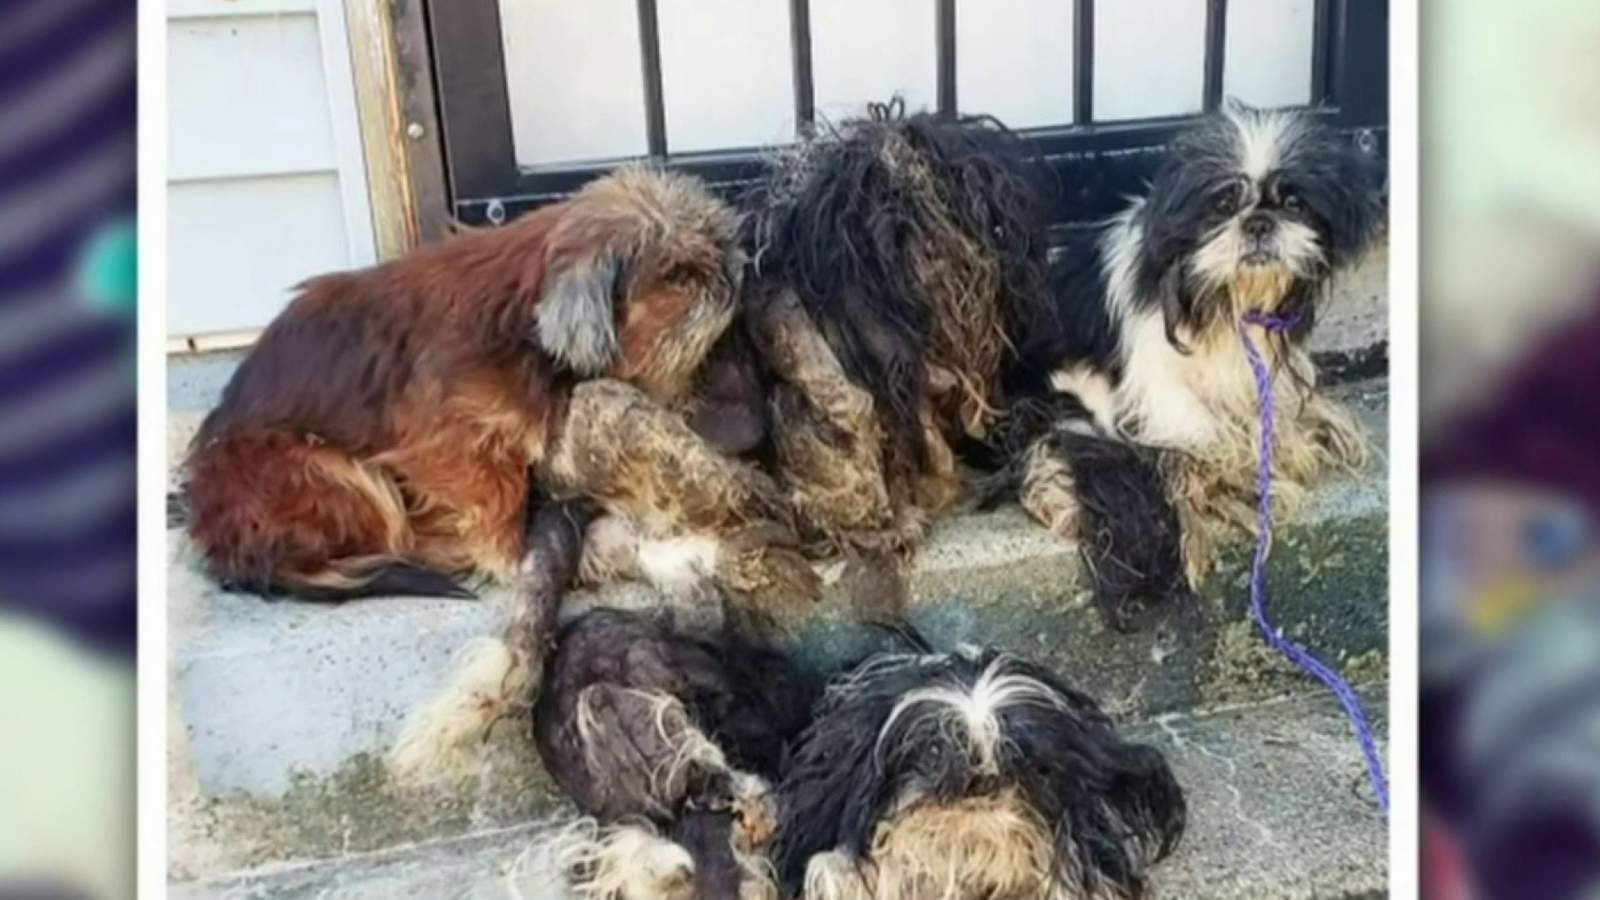 12 Shih Tzus rescued after being found abandoned in Detroit neighborhood